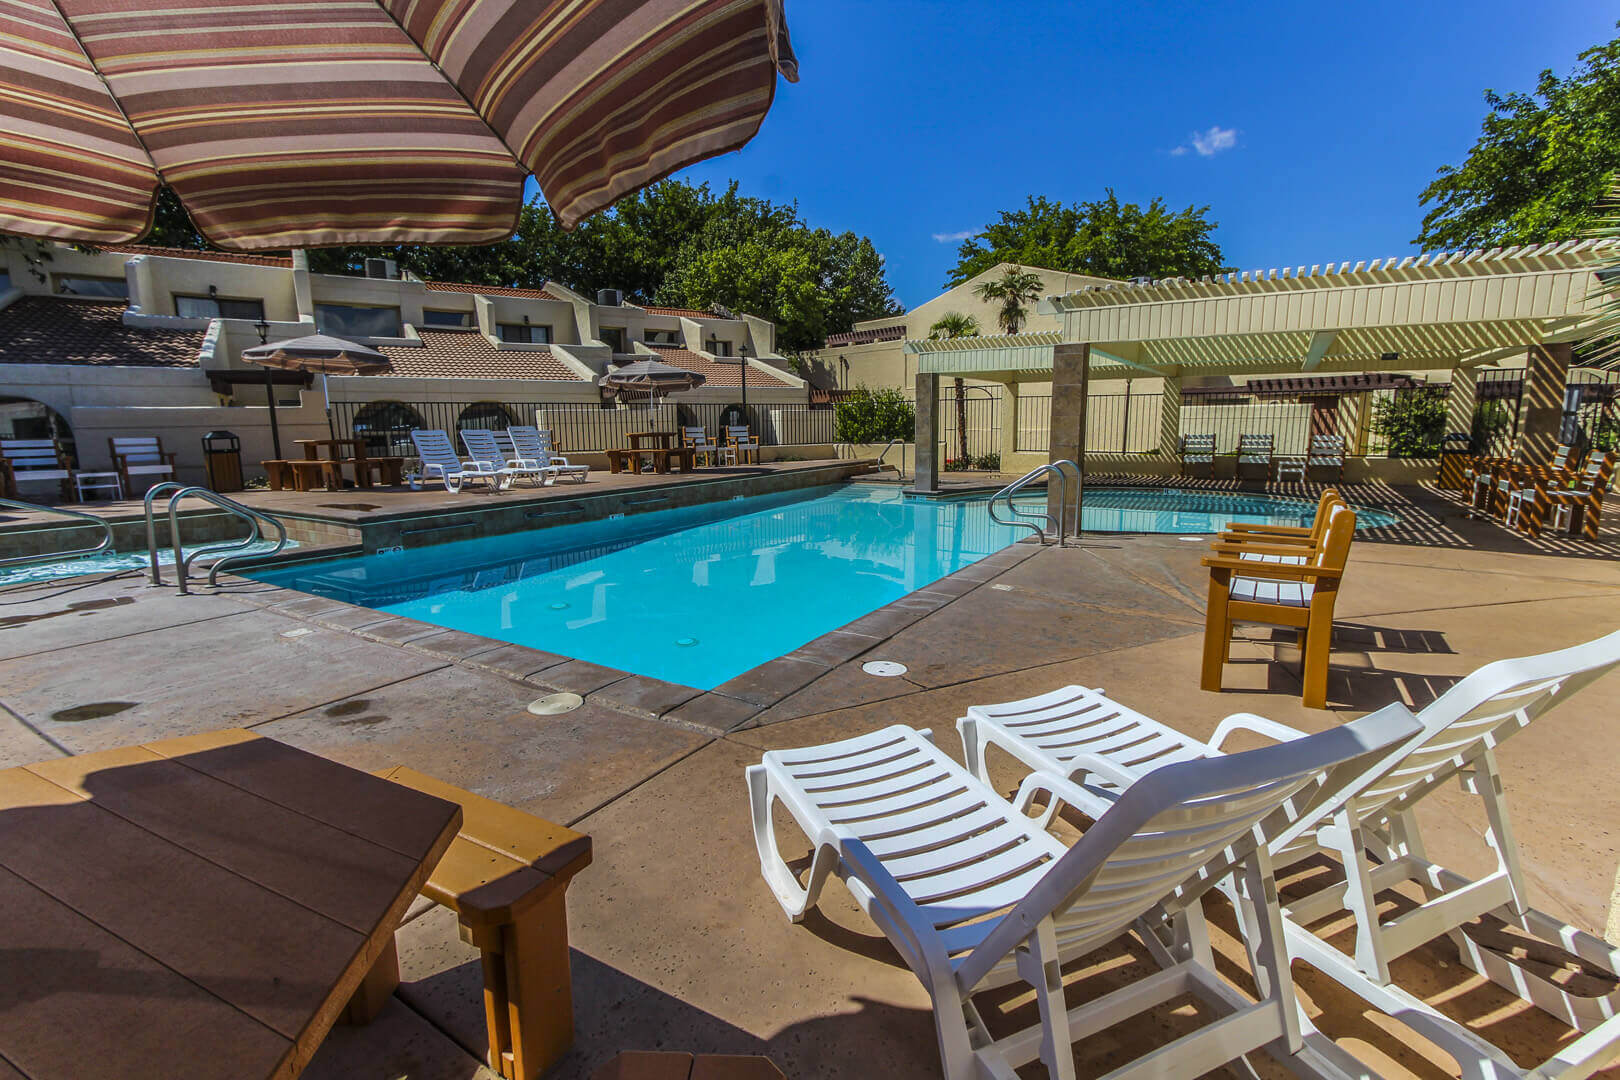 A refreshing outdoor swimming pool at VRI's Villas at South Gate in St. George, Utah.